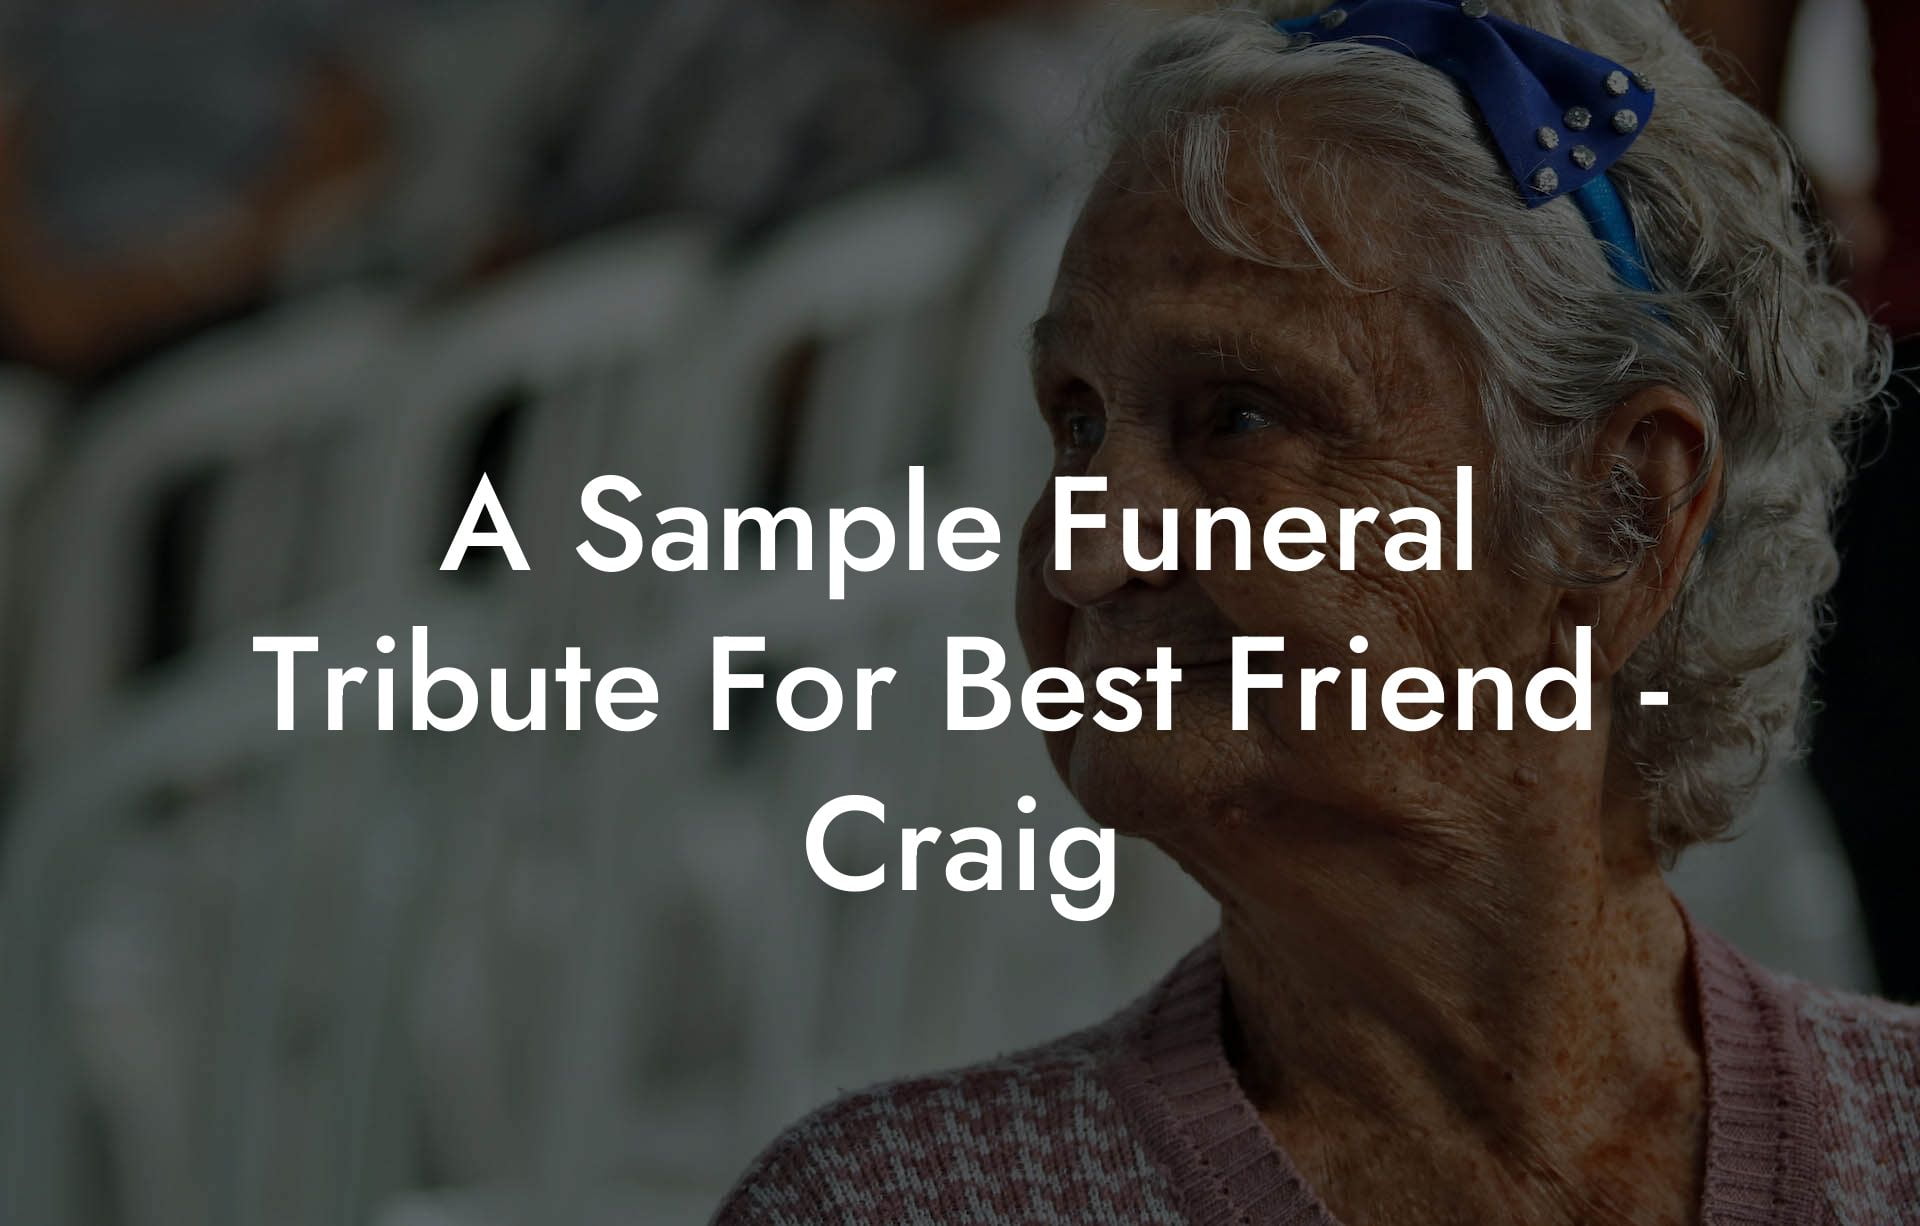 A Sample Funeral Tribute For Best Friend - Craig